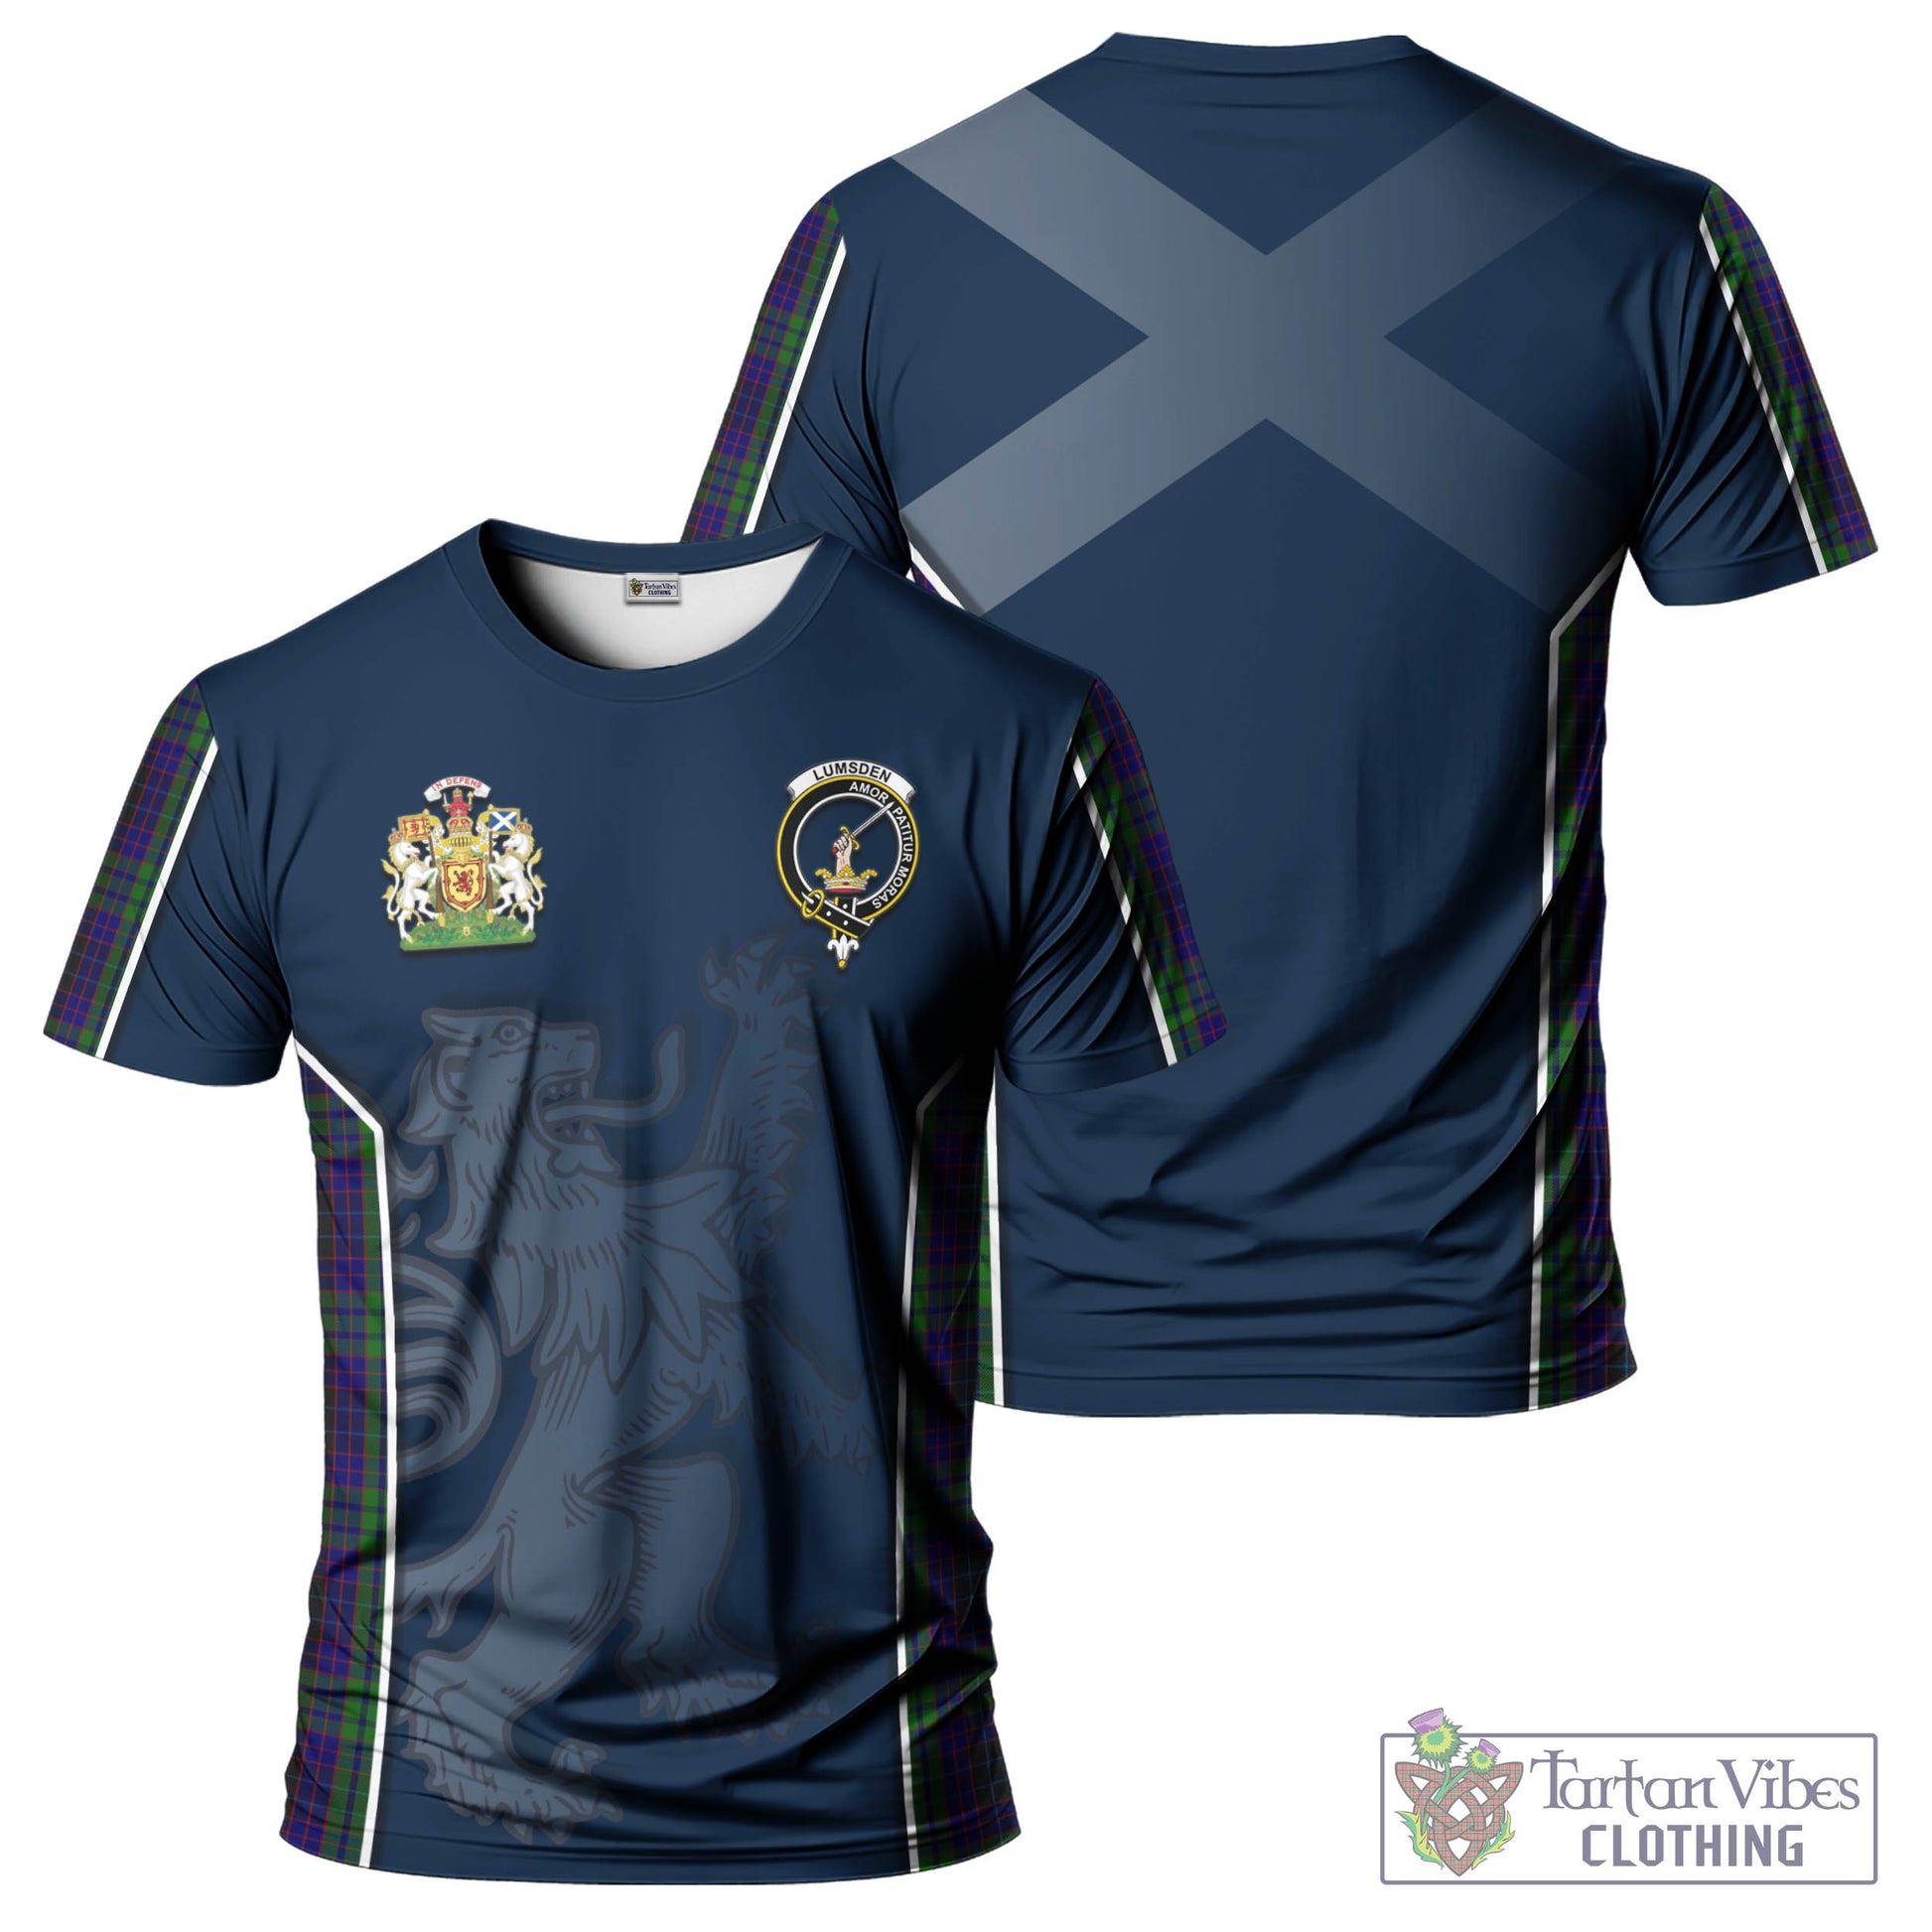 Tartan Vibes Clothing Lumsden Green Tartan T-Shirt with Family Crest and Lion Rampant Vibes Sport Style